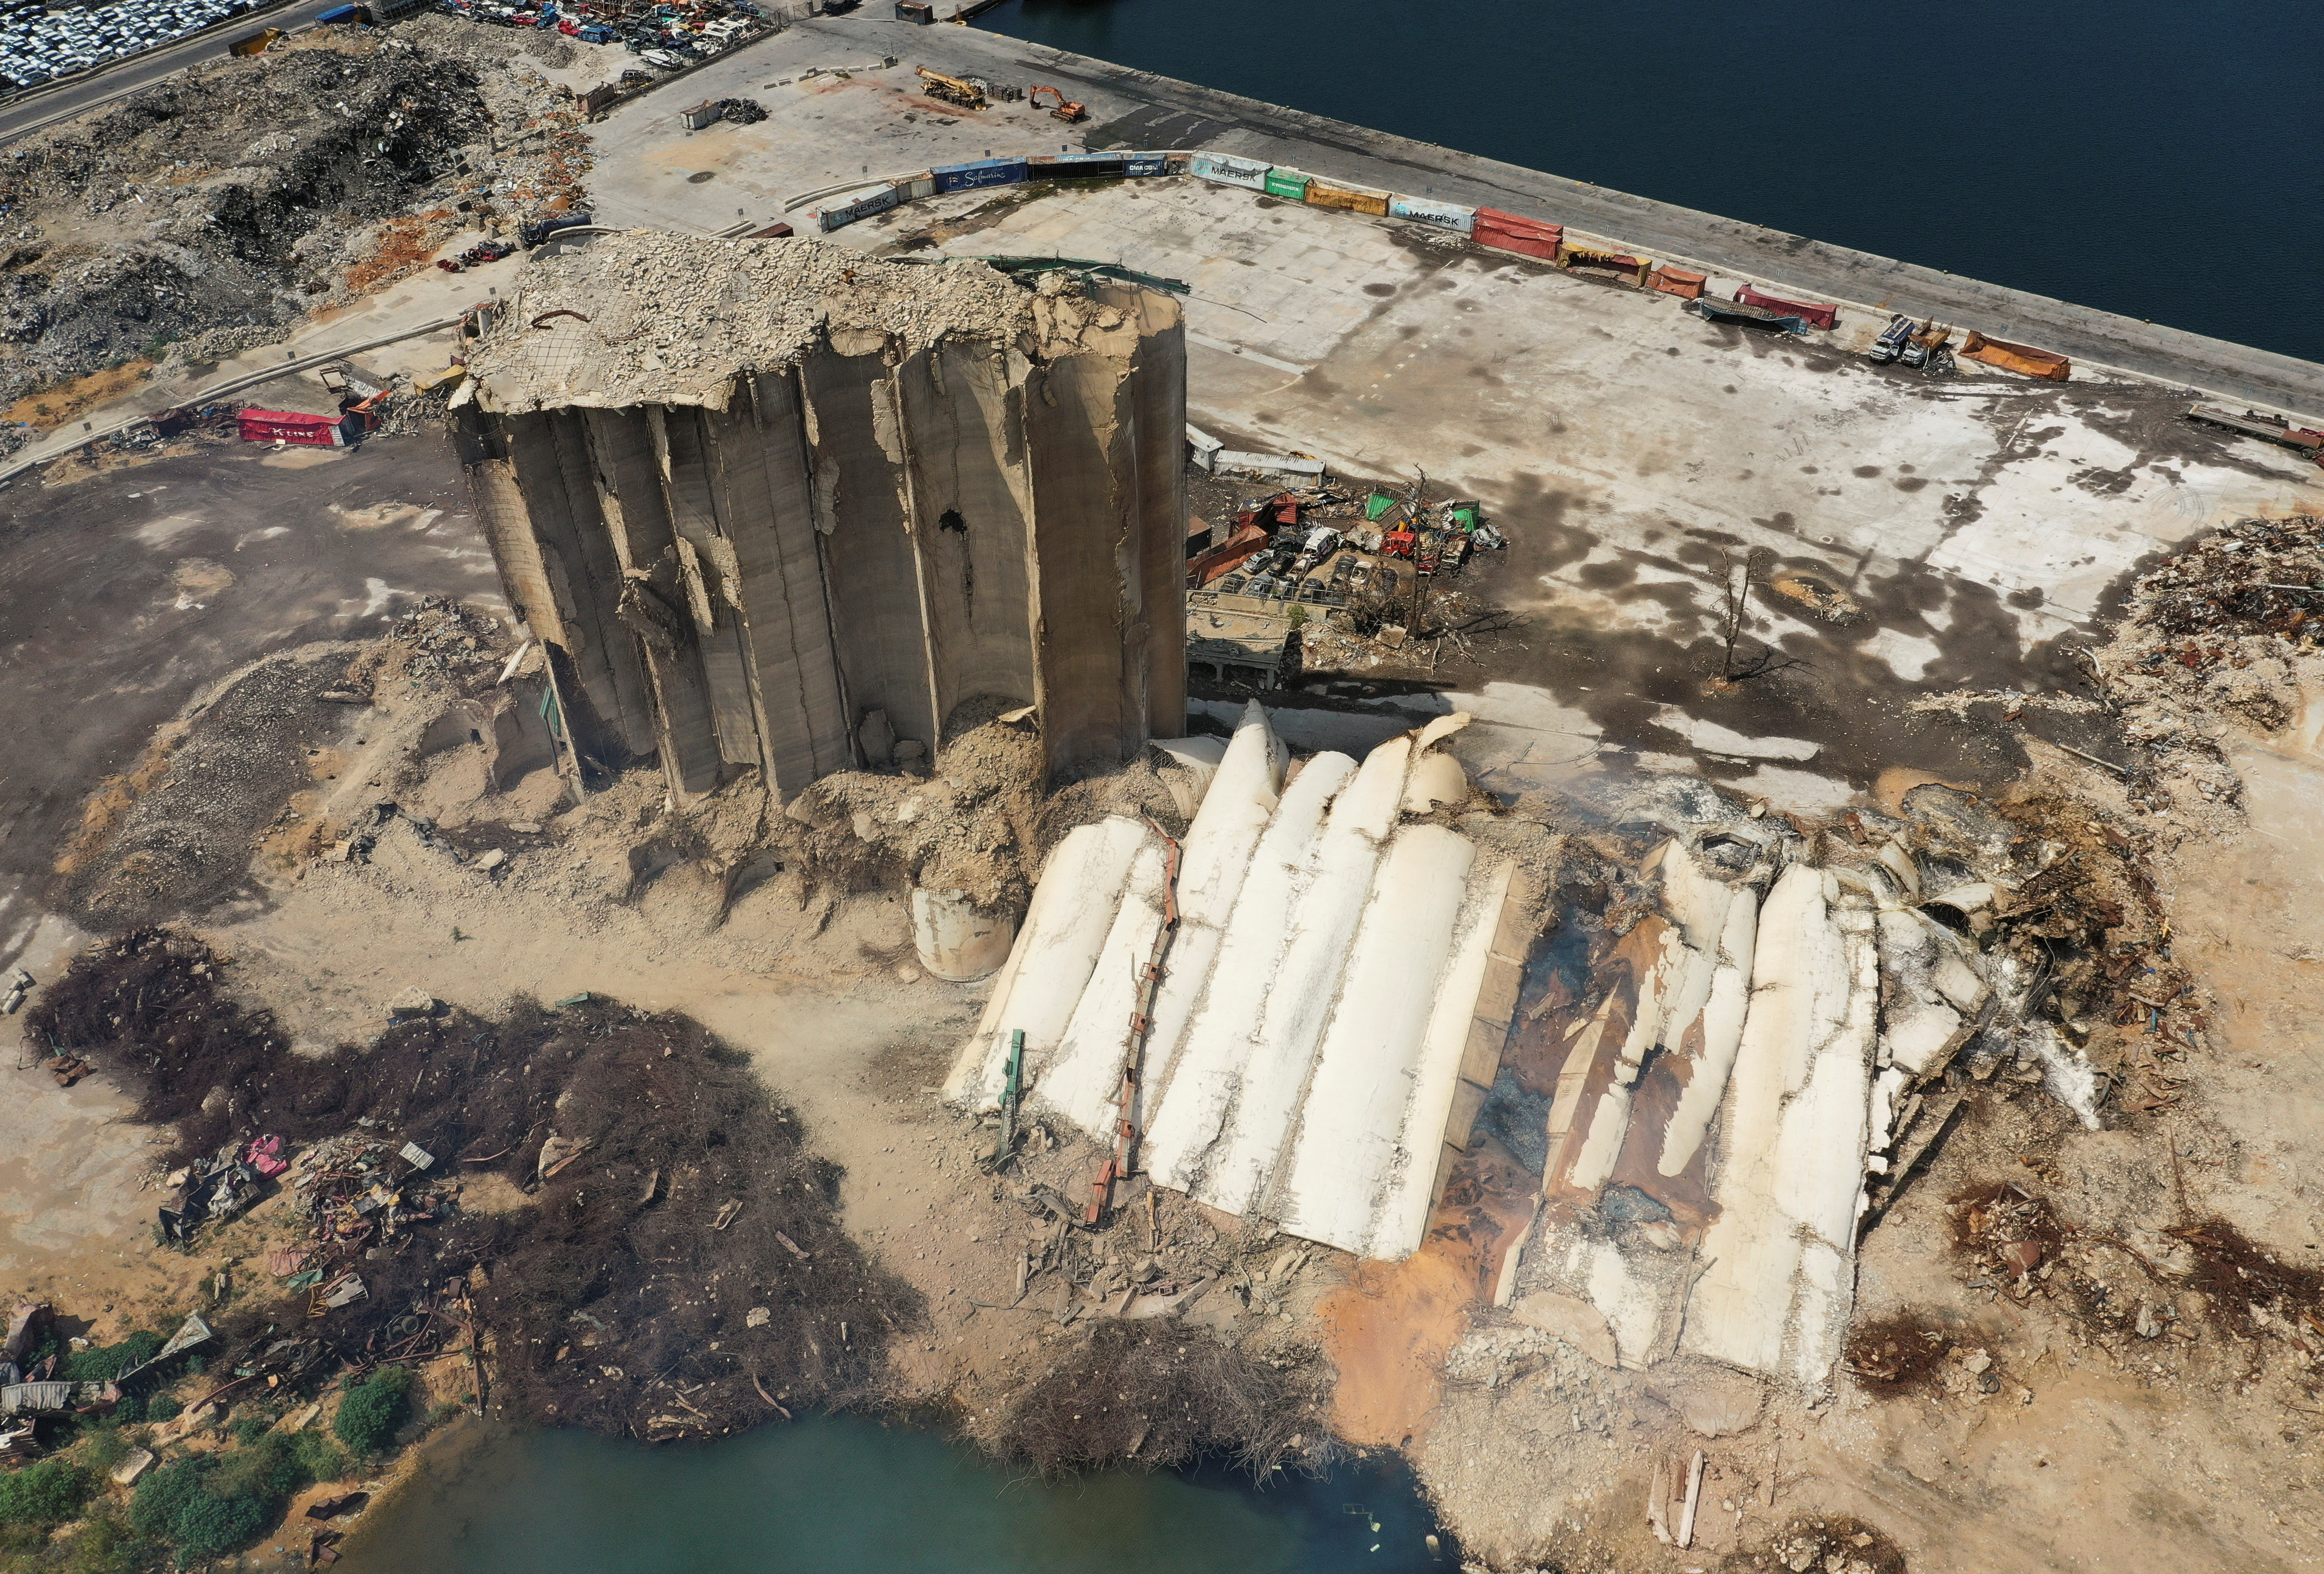 A view shows the collapsed northern section of the Beirut grain silos, damaged in the August 2020 port blast